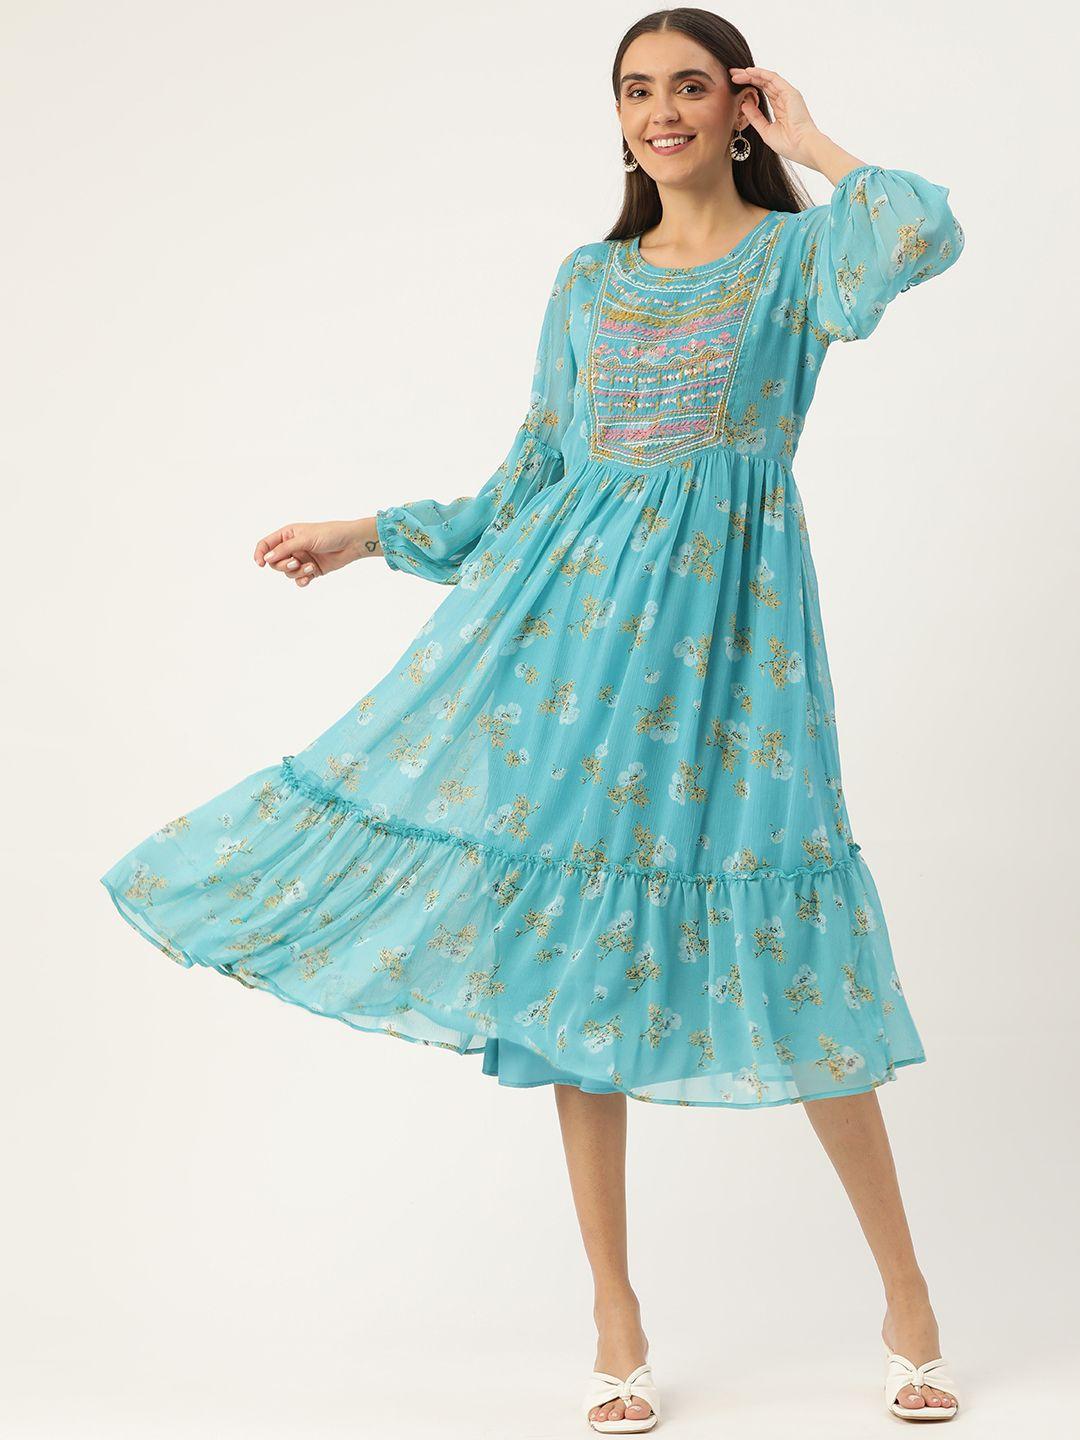 antheaa turquoise blue floral embroidered detail tiered dress